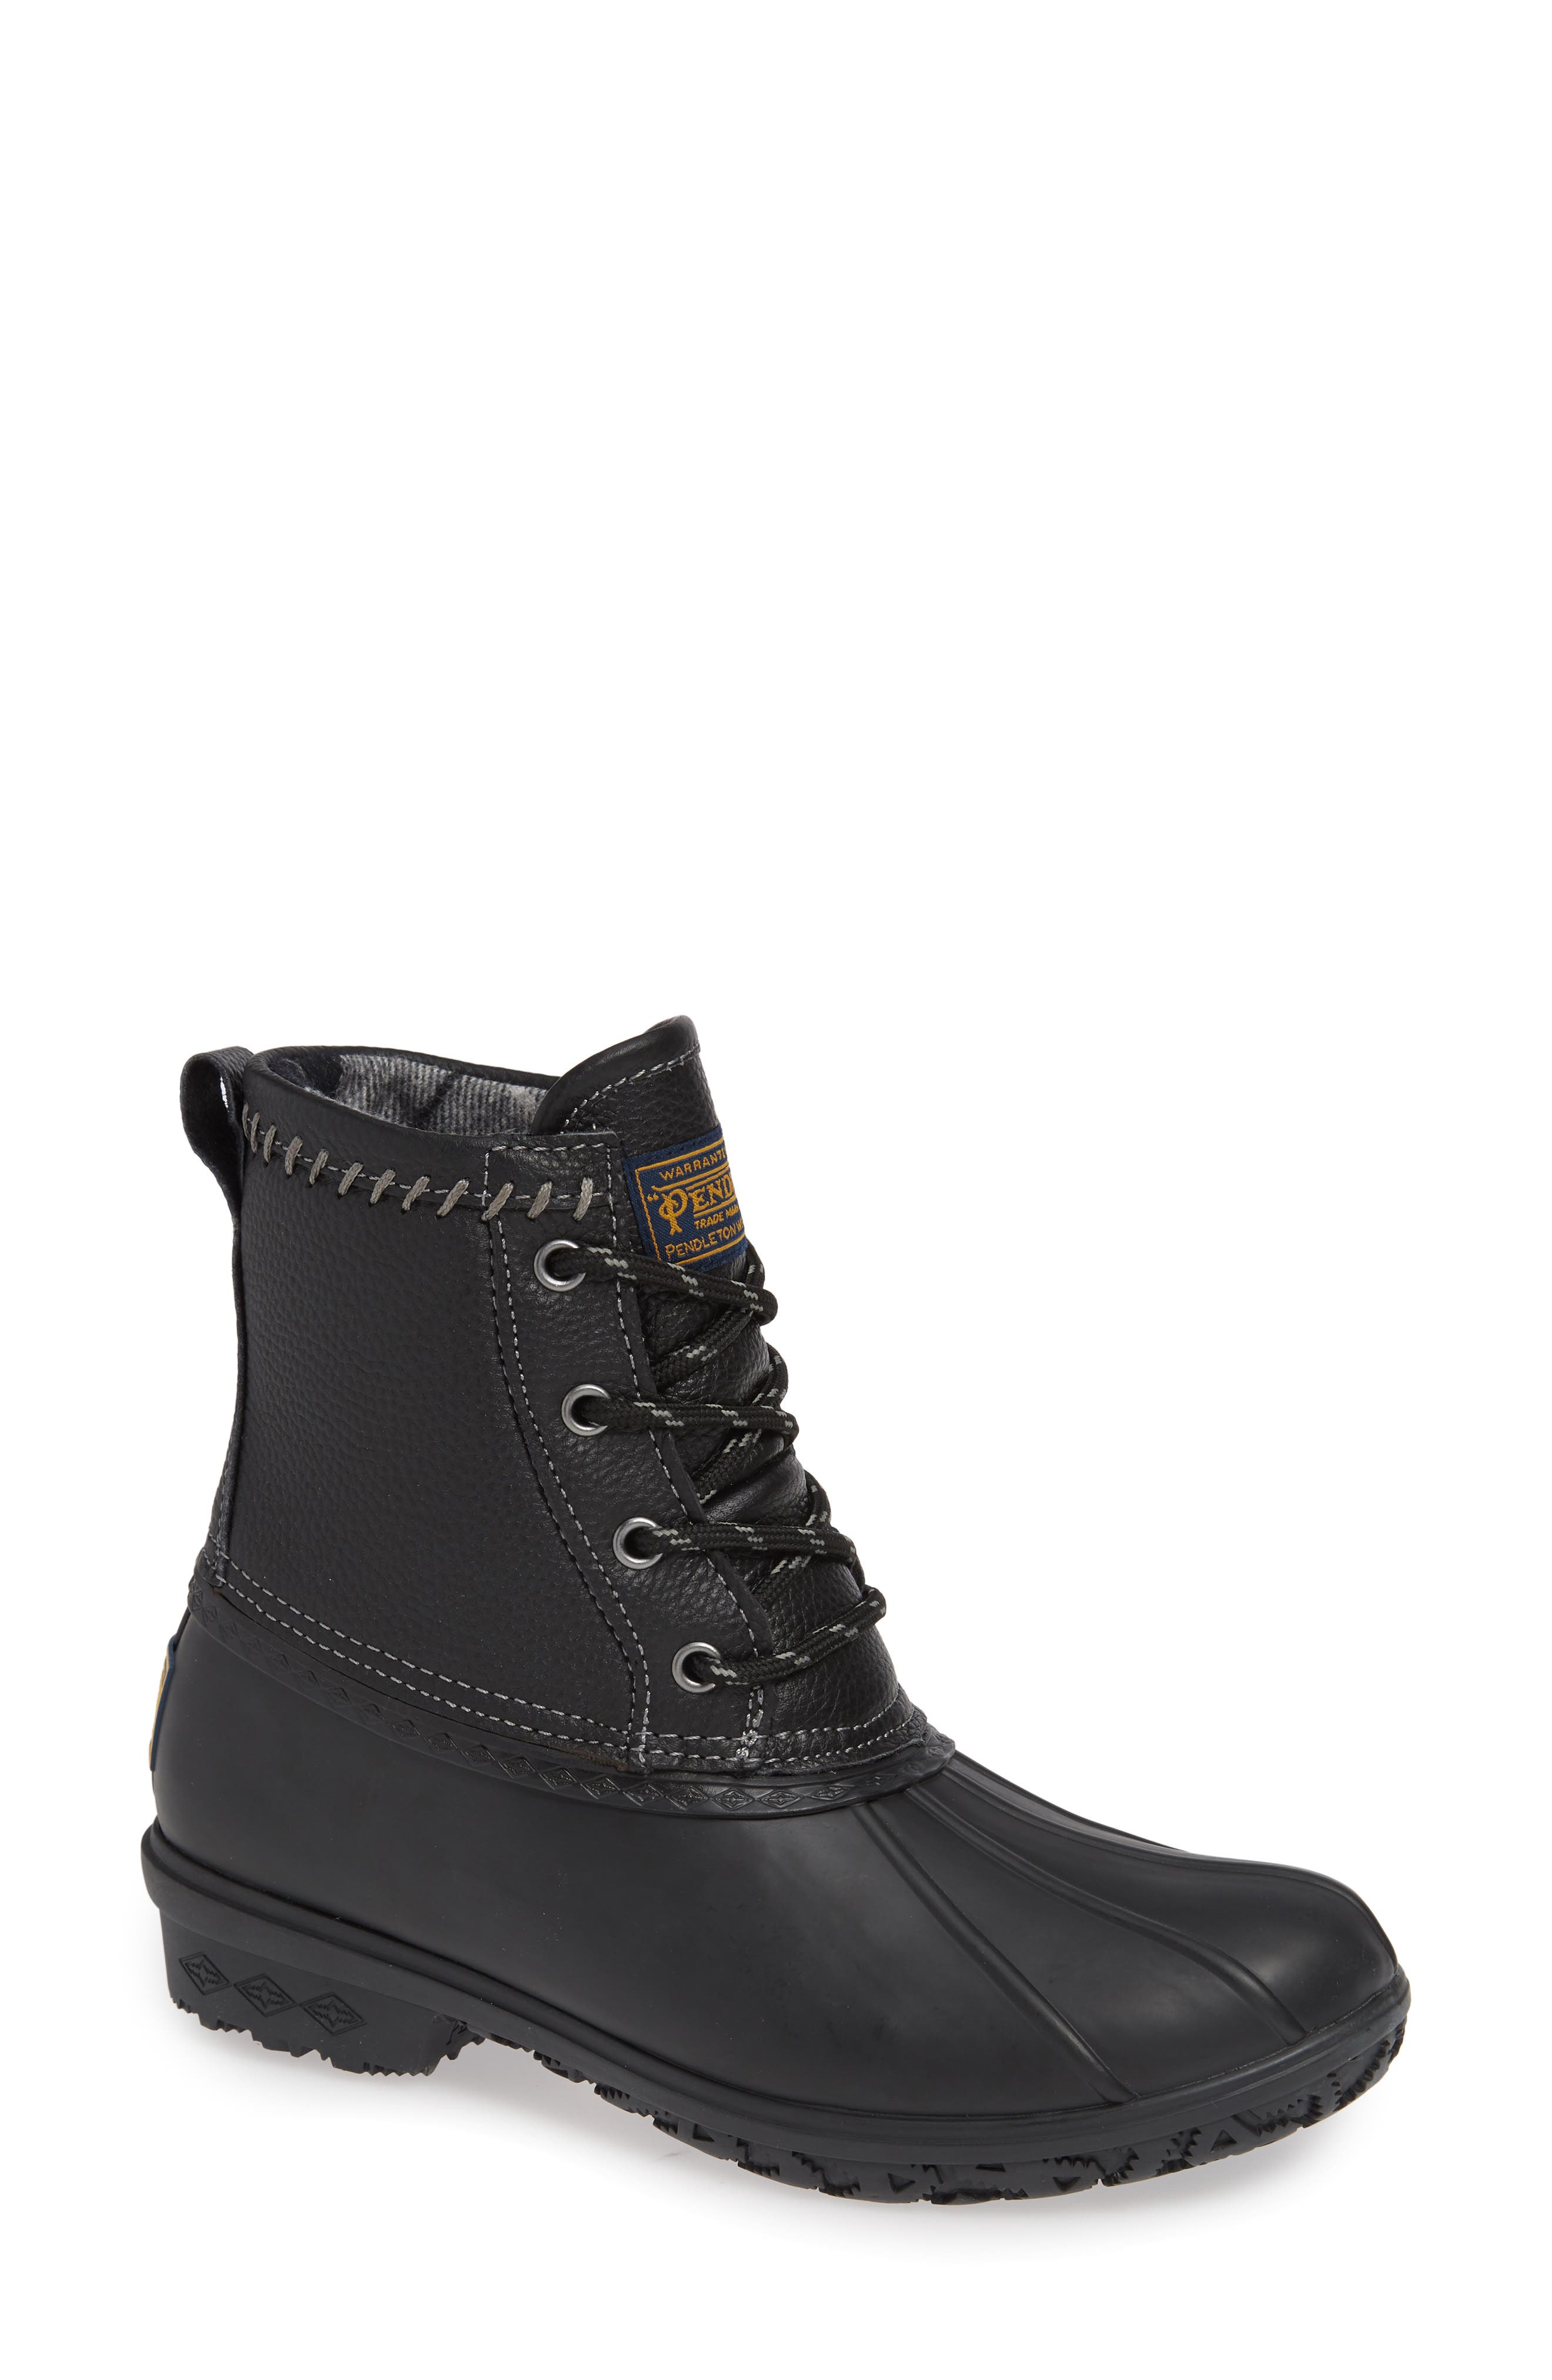 duck boots all black